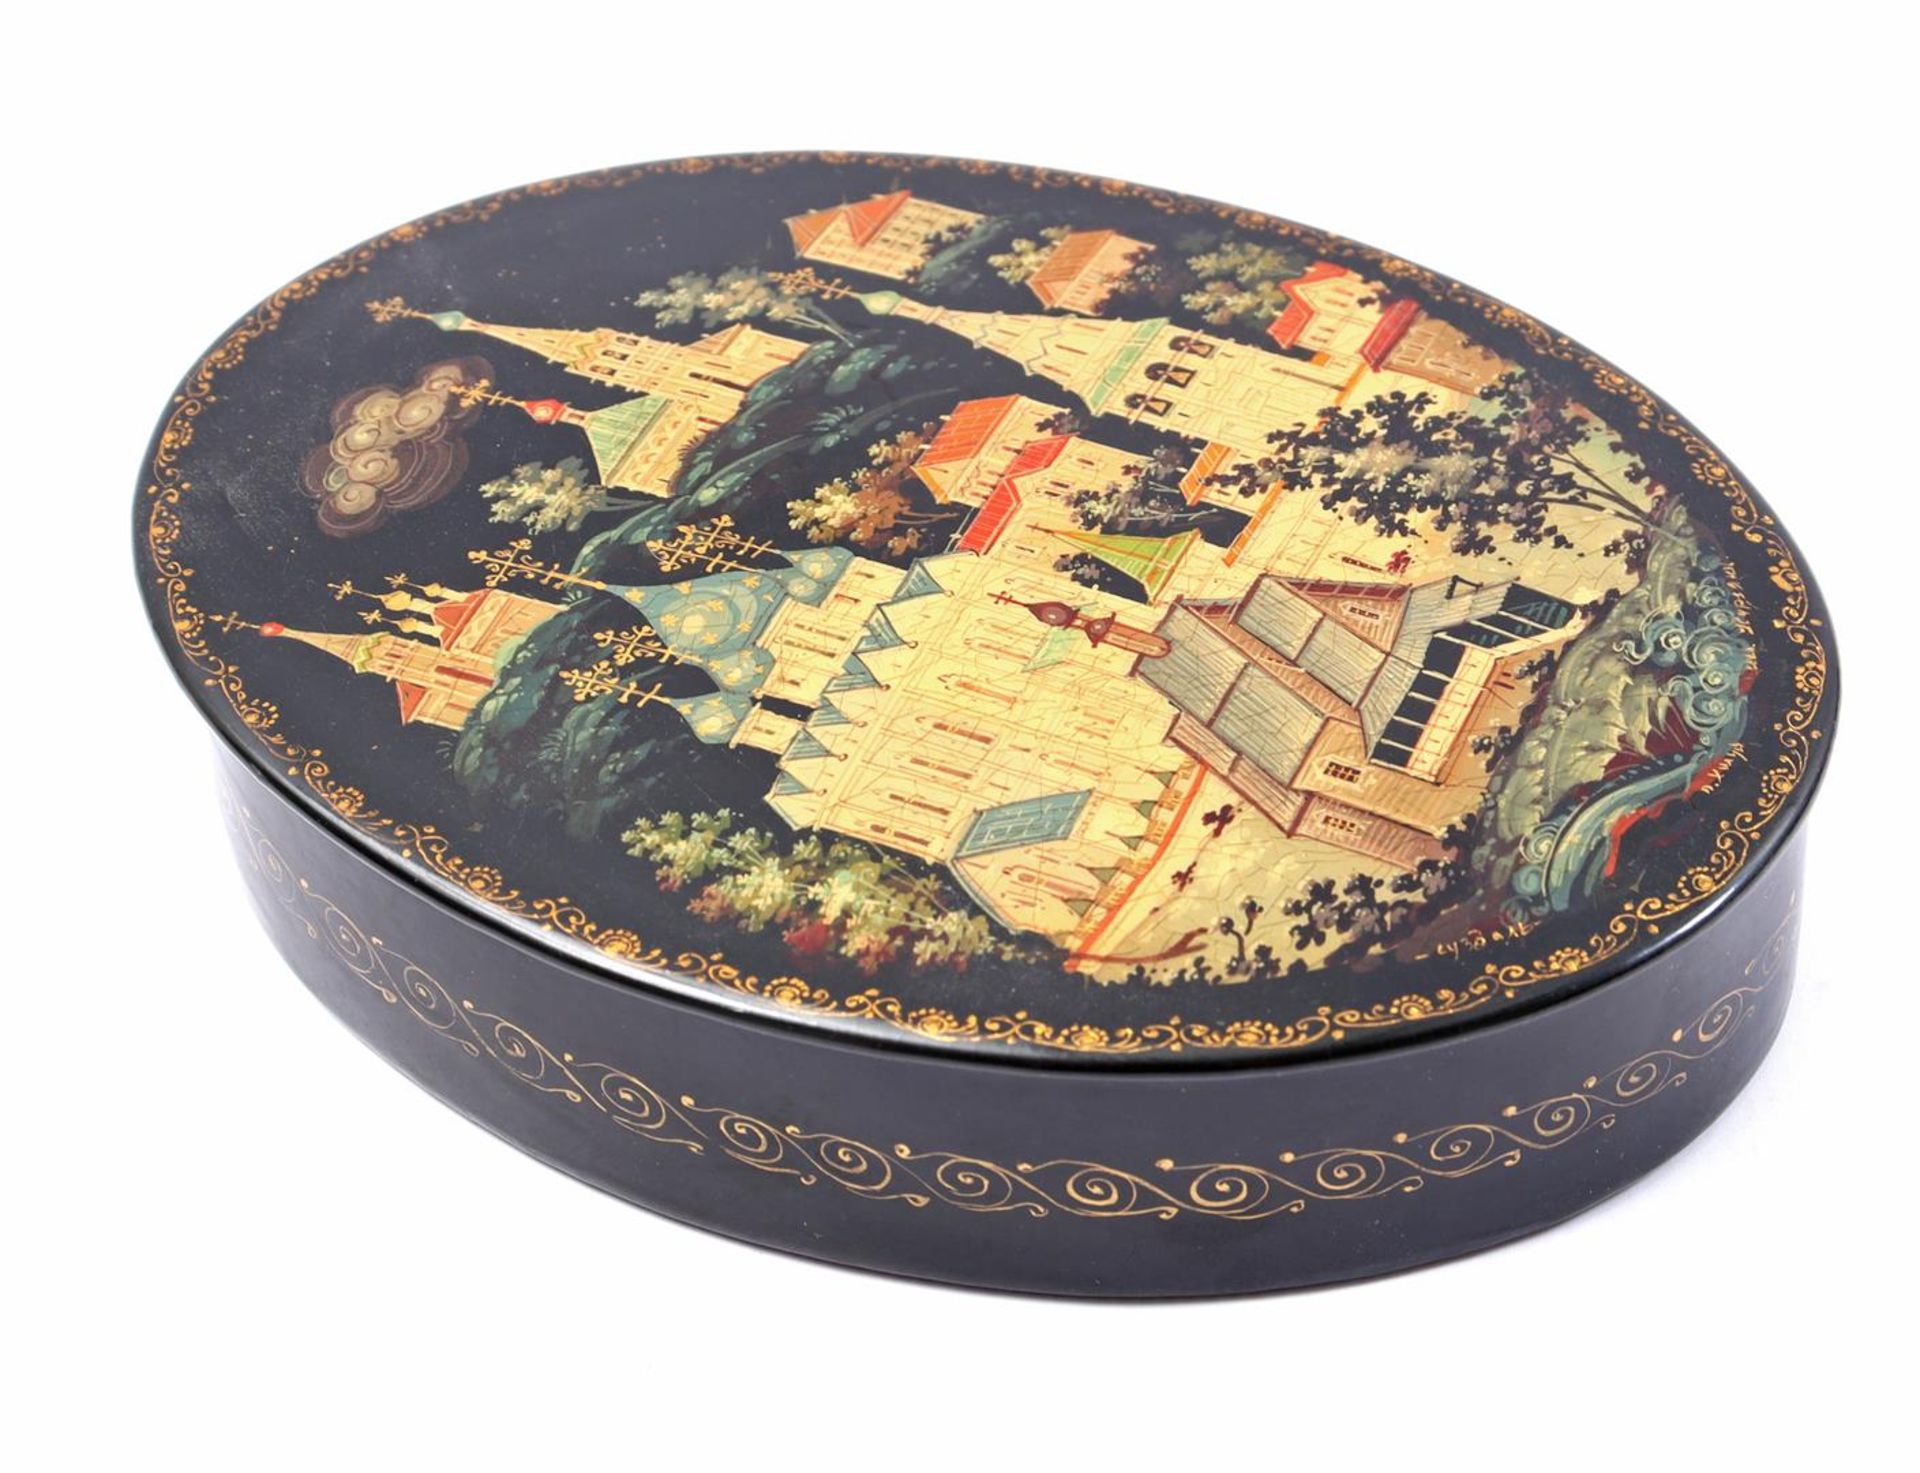 Oval hand-painted Russian lacquer box